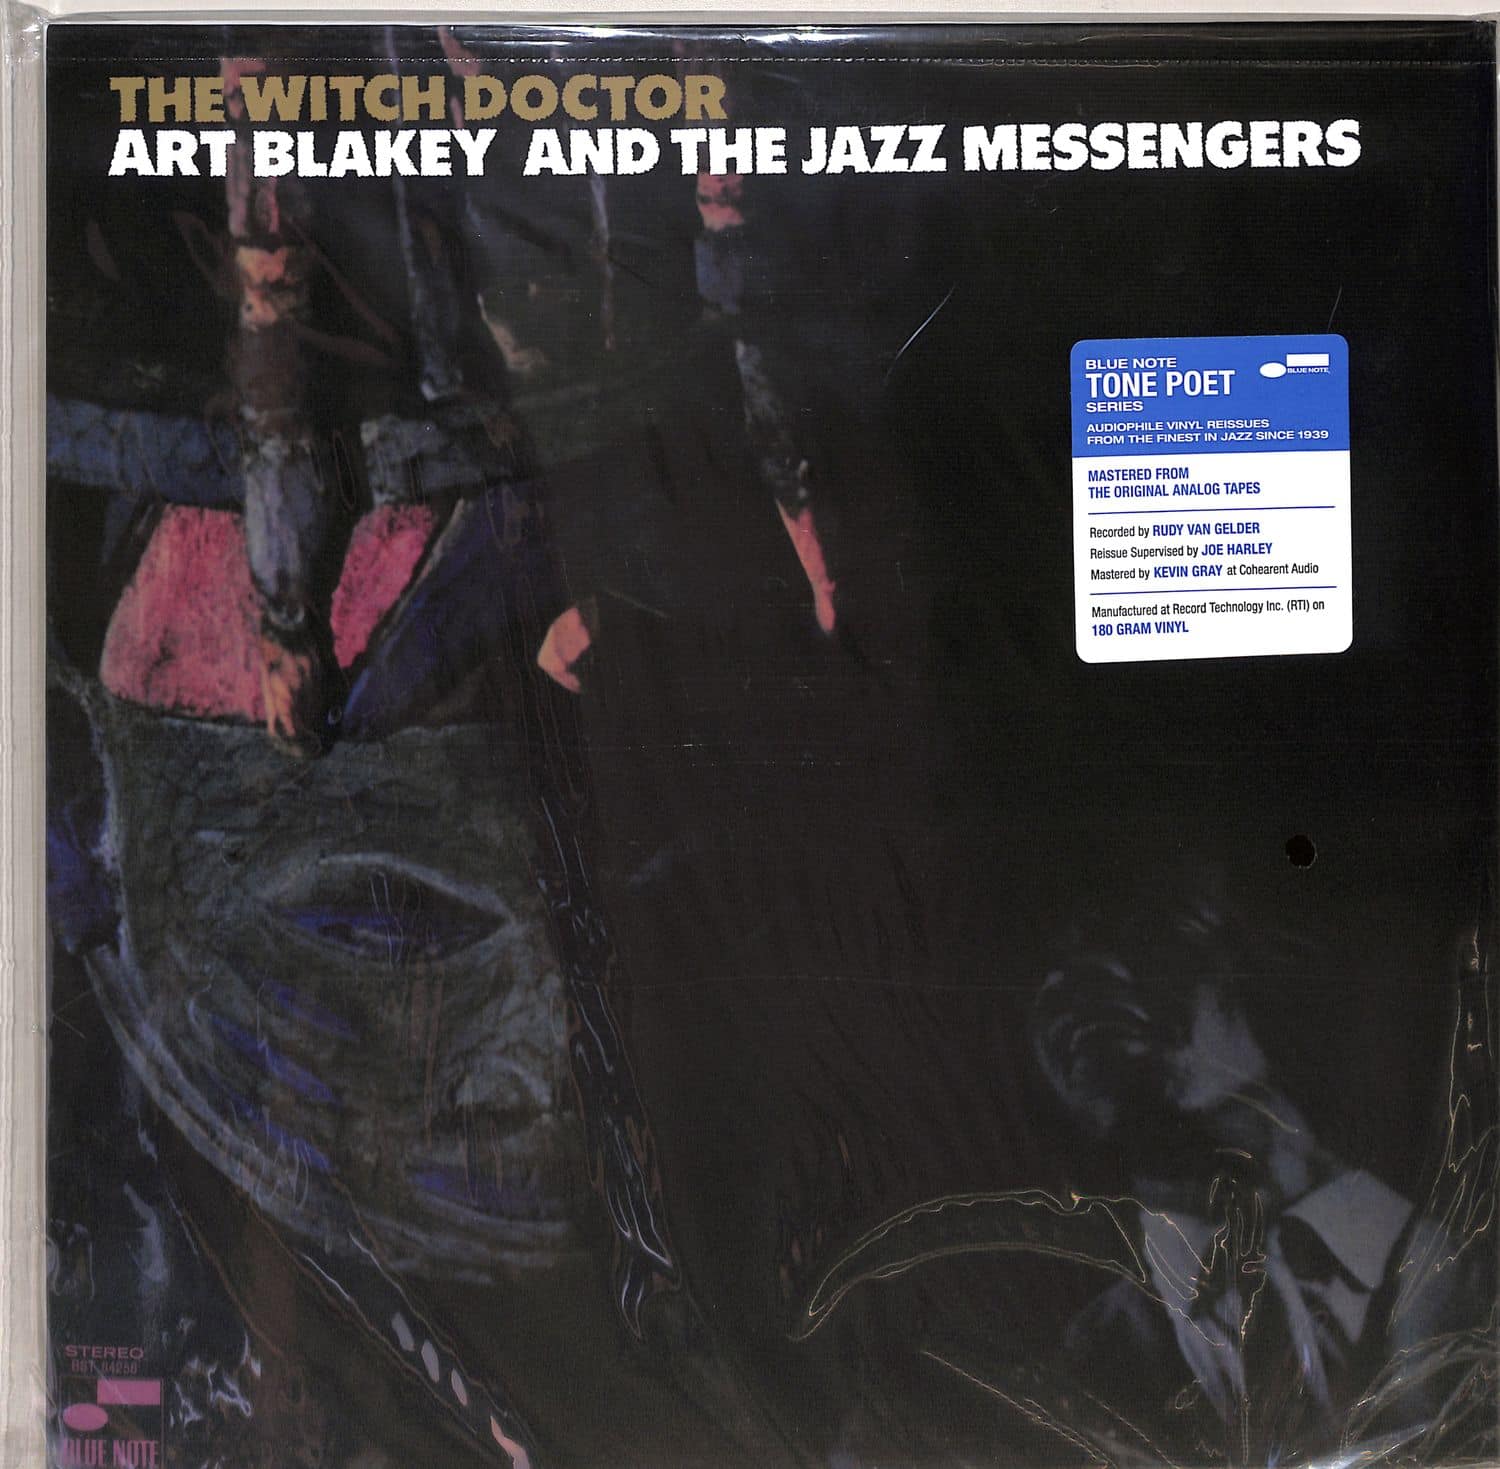 Art Blakey & The Jazz Messengers - THE WITCH DOCTOR 